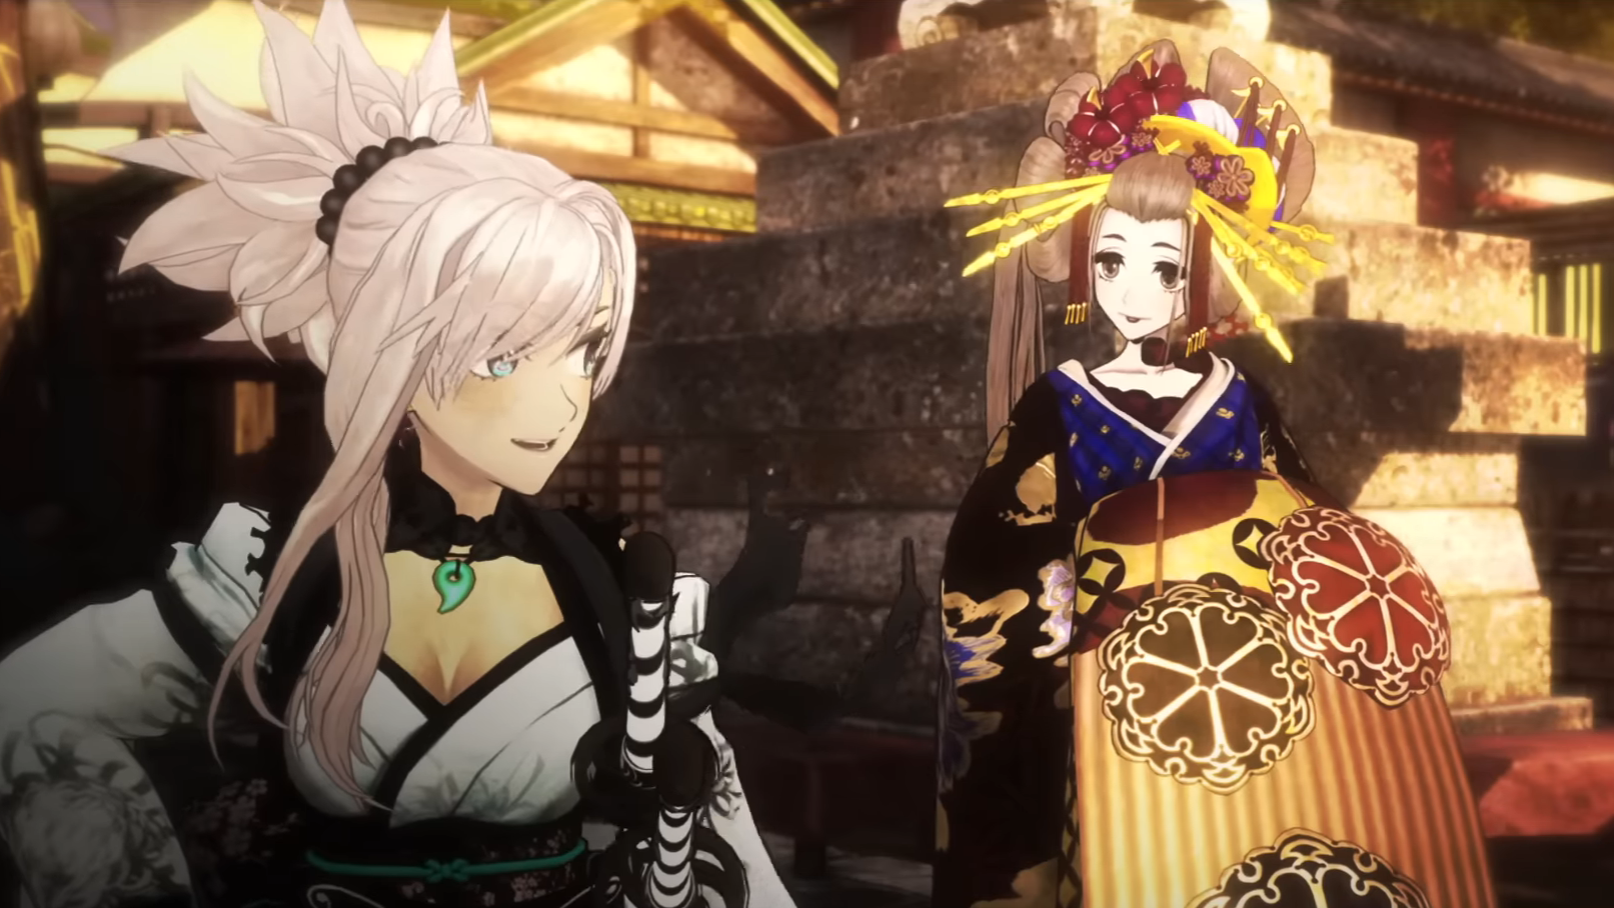 Fate/Samurai Remnant Announces Update Adding Replayable Battles with Other Servants + Easier & Harder Difficulties